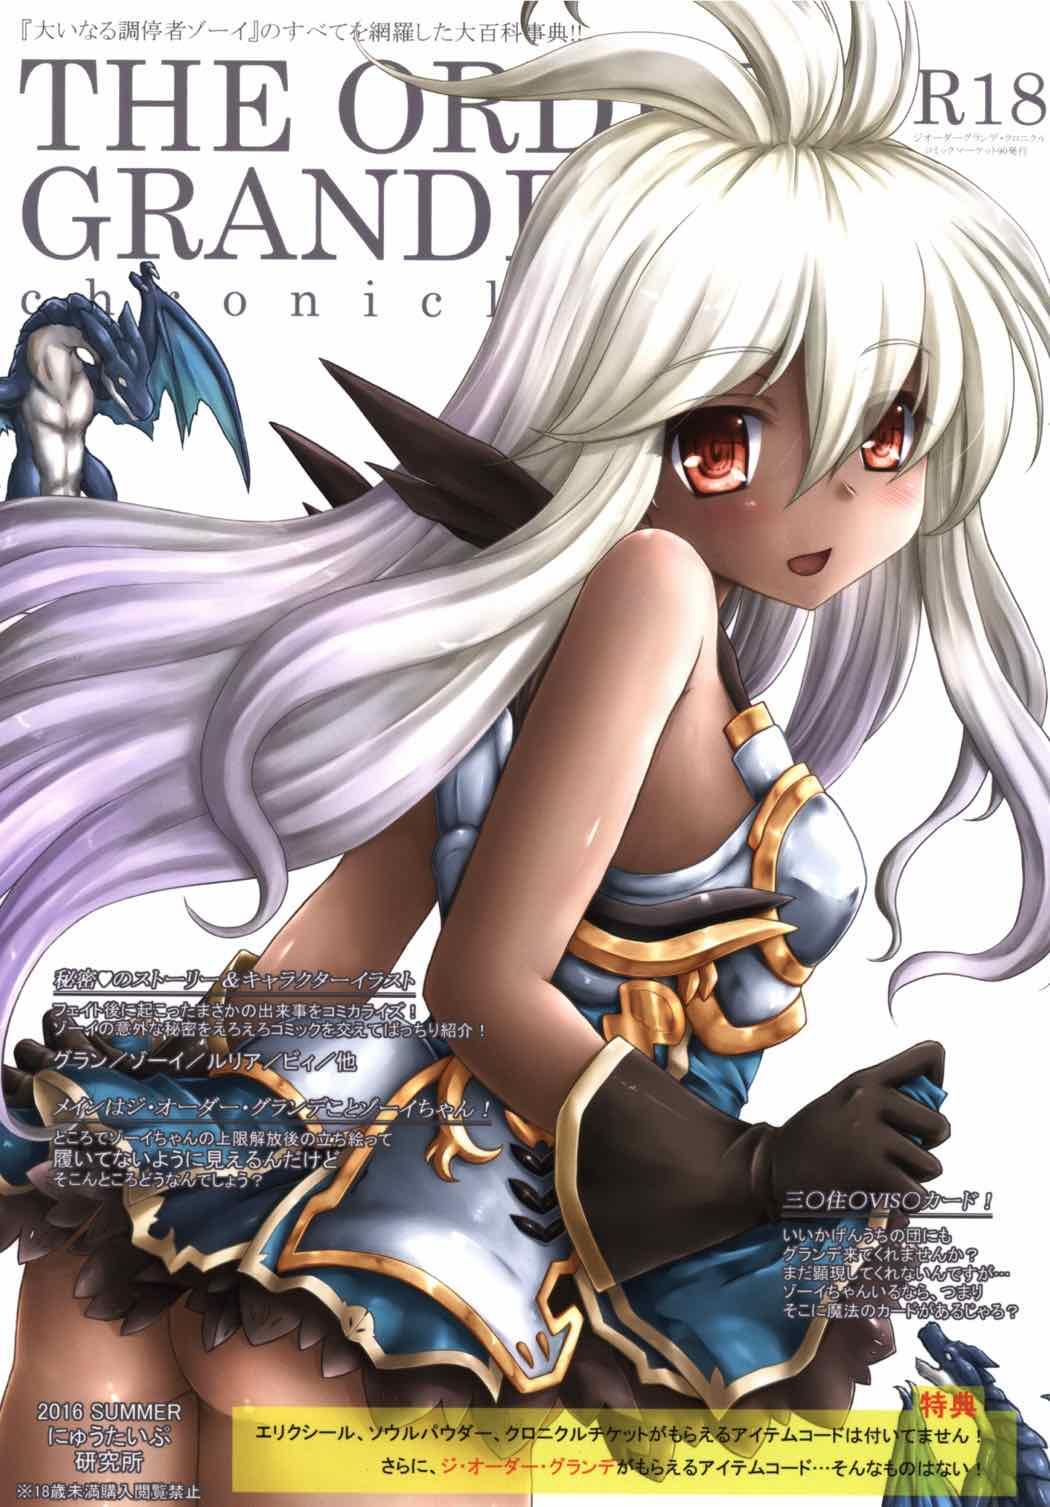 THE ORDER GRANDE chronicle 0